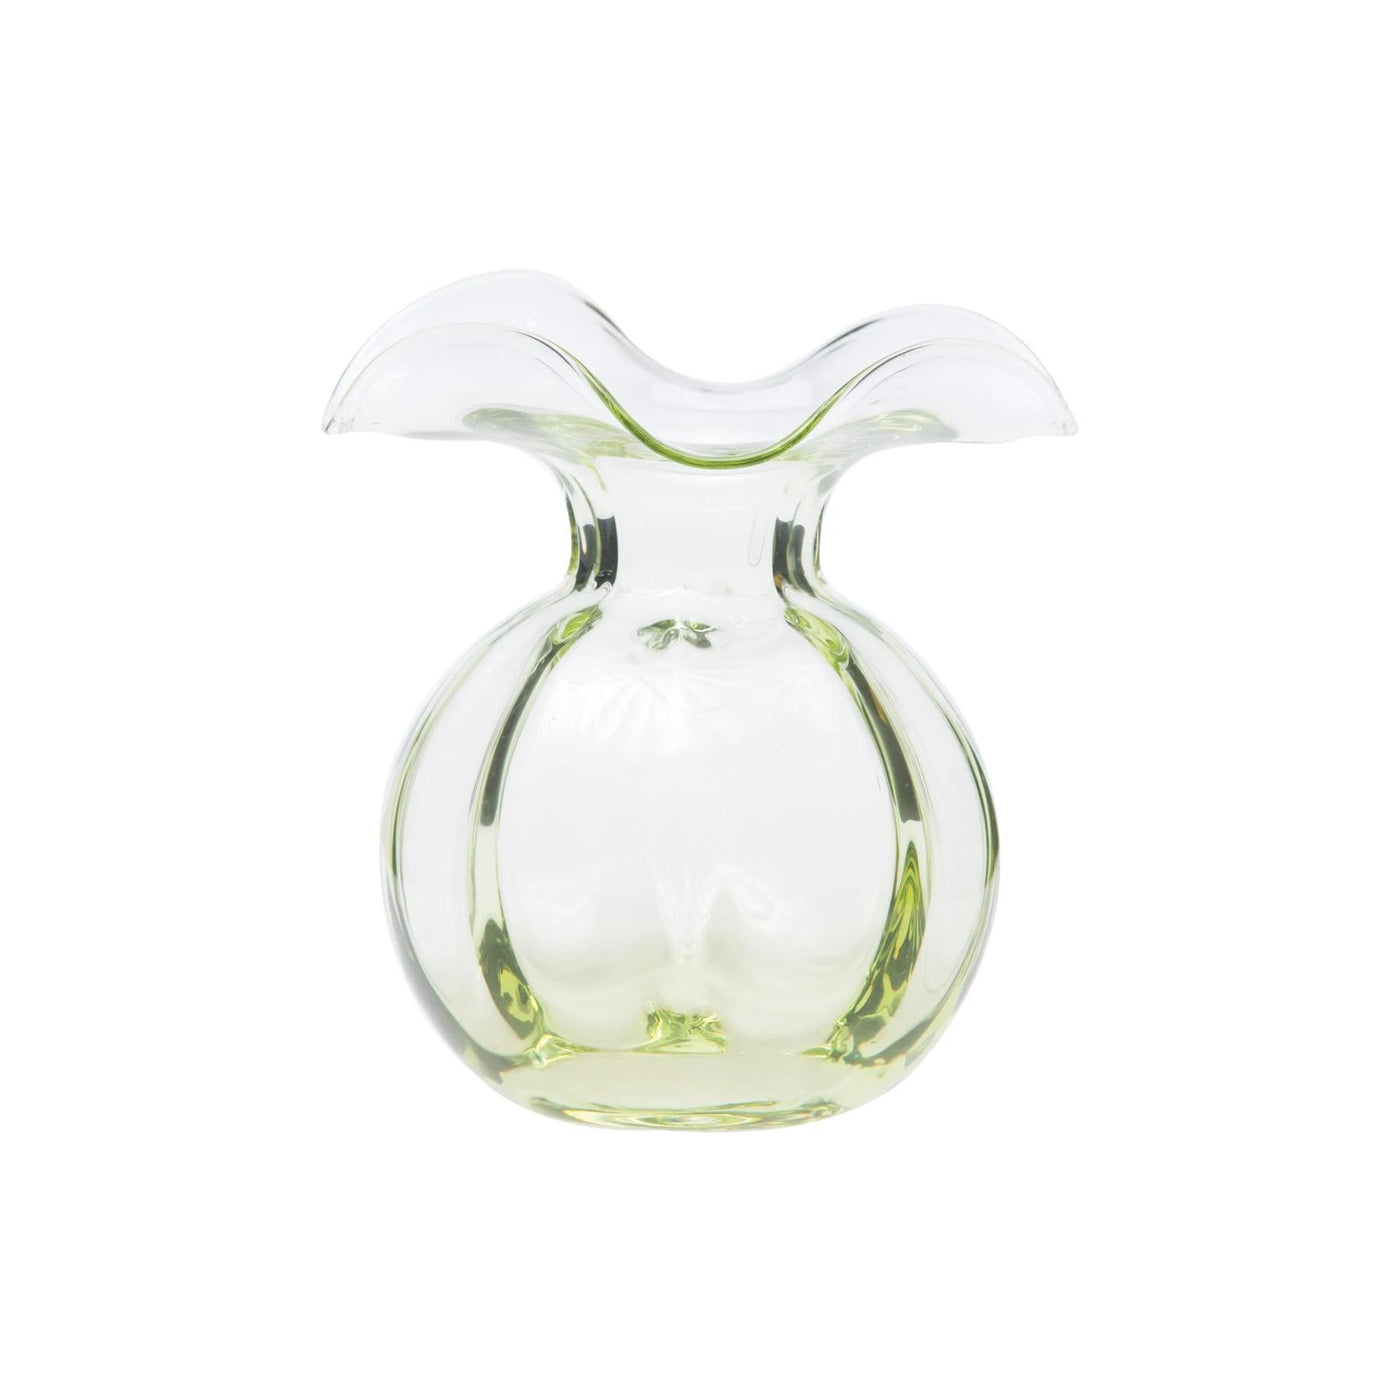 Vietri Hibiscus Bud Vase-HOME/GIFTWARE-Green-Kevin's Fine Outdoor Gear & Apparel